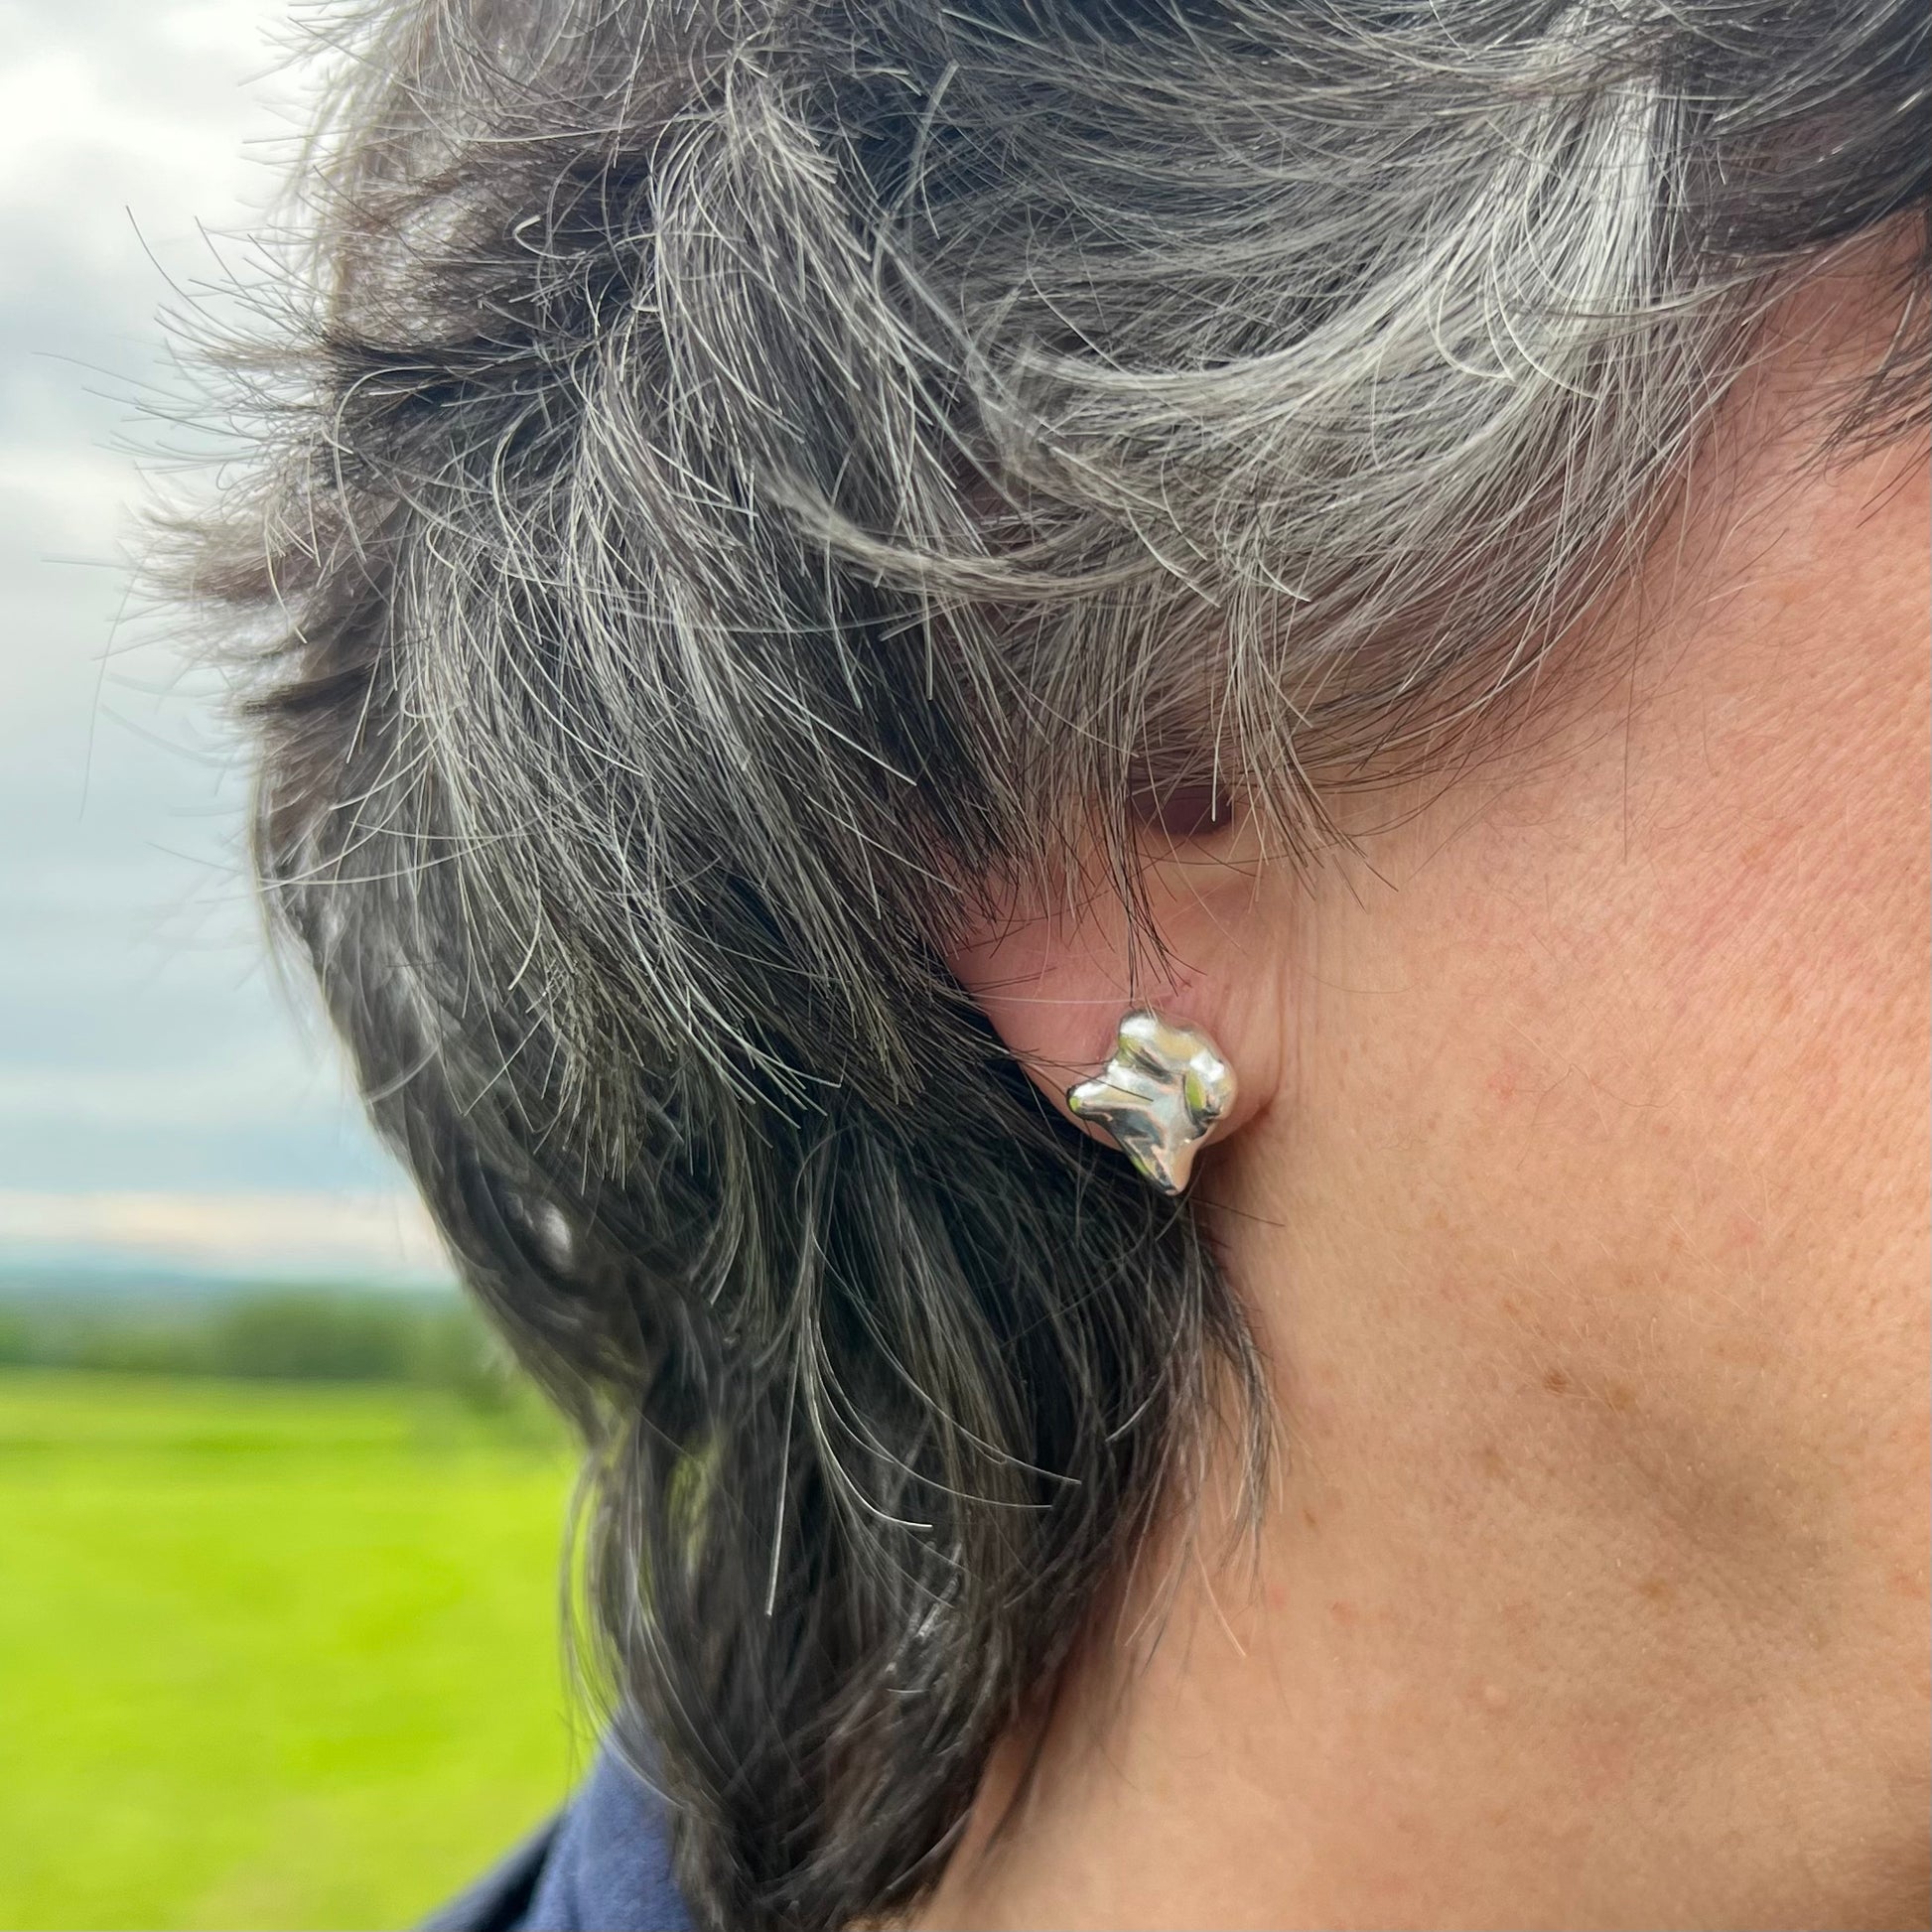 The swirling stud earrings on a woman with short black hair.